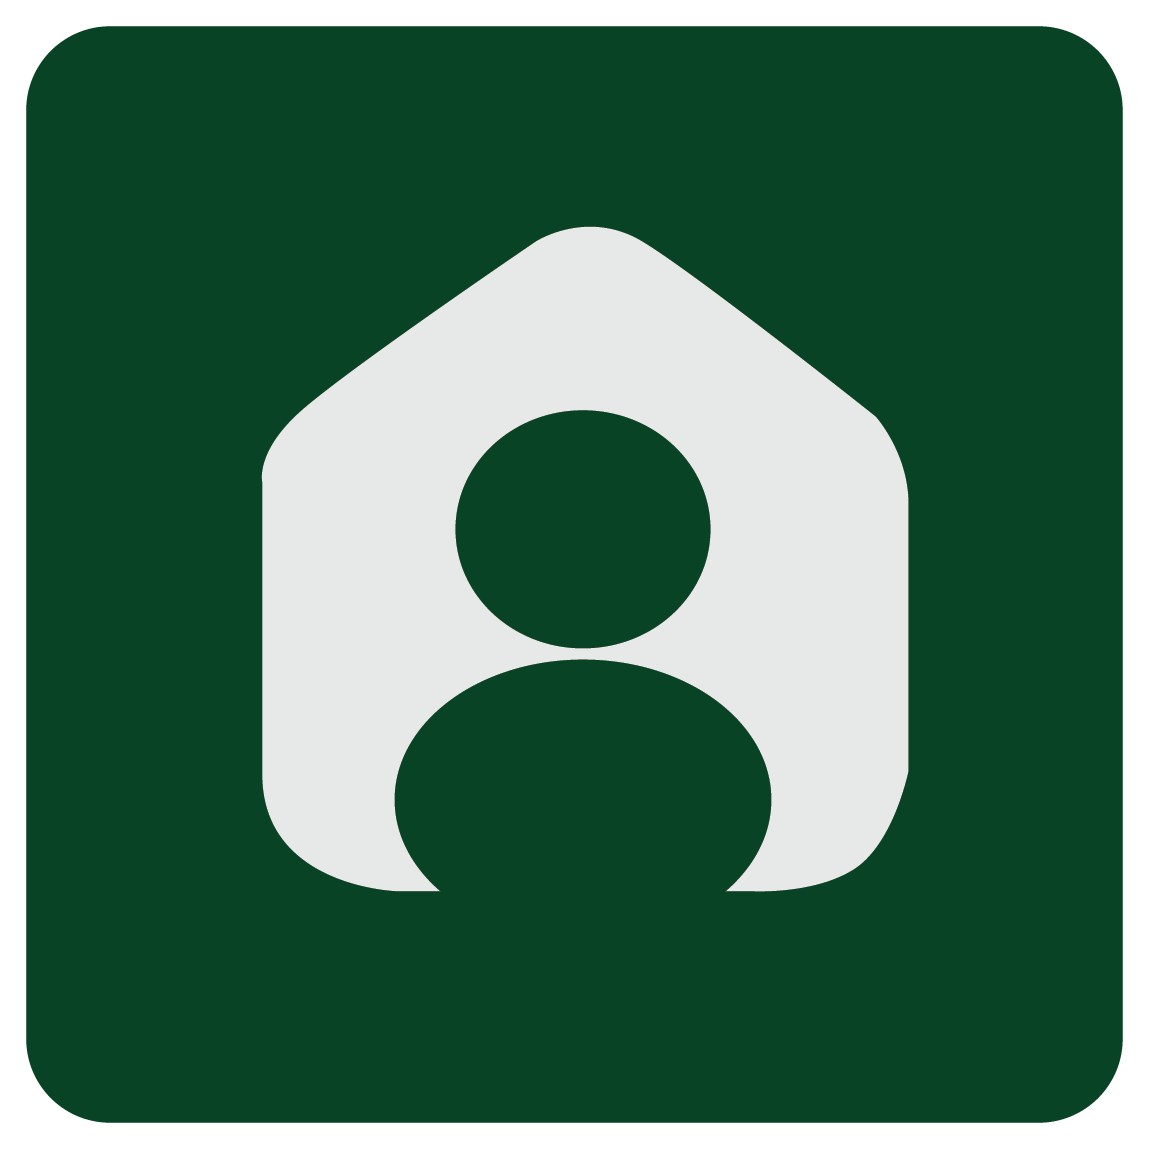 A green square with a white icon of a person in a house.